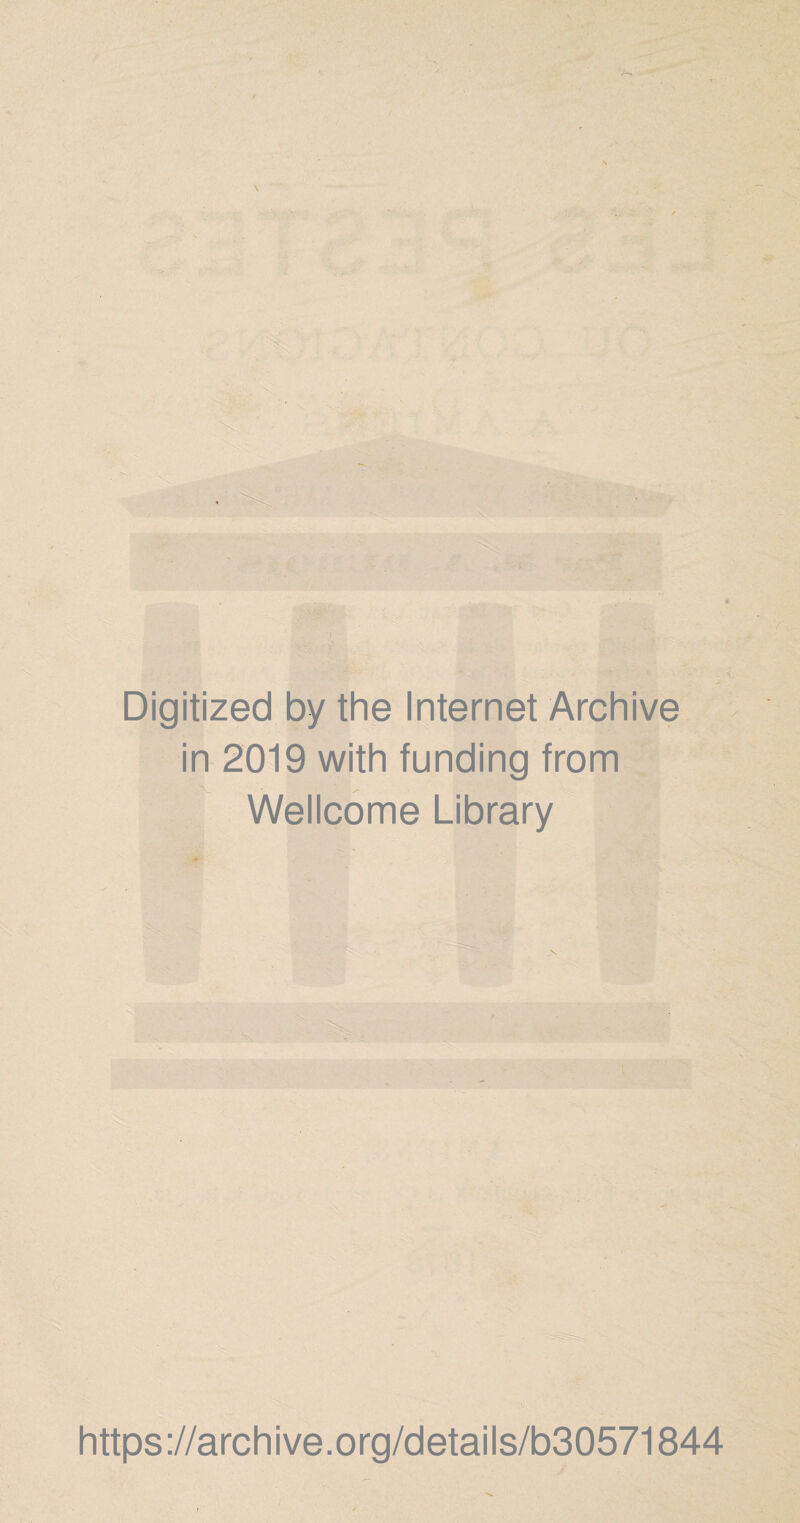 Digitized by the Internet Archive in 2019 with funding from ™ Wellcome Library https://archive.org/details/b30571844